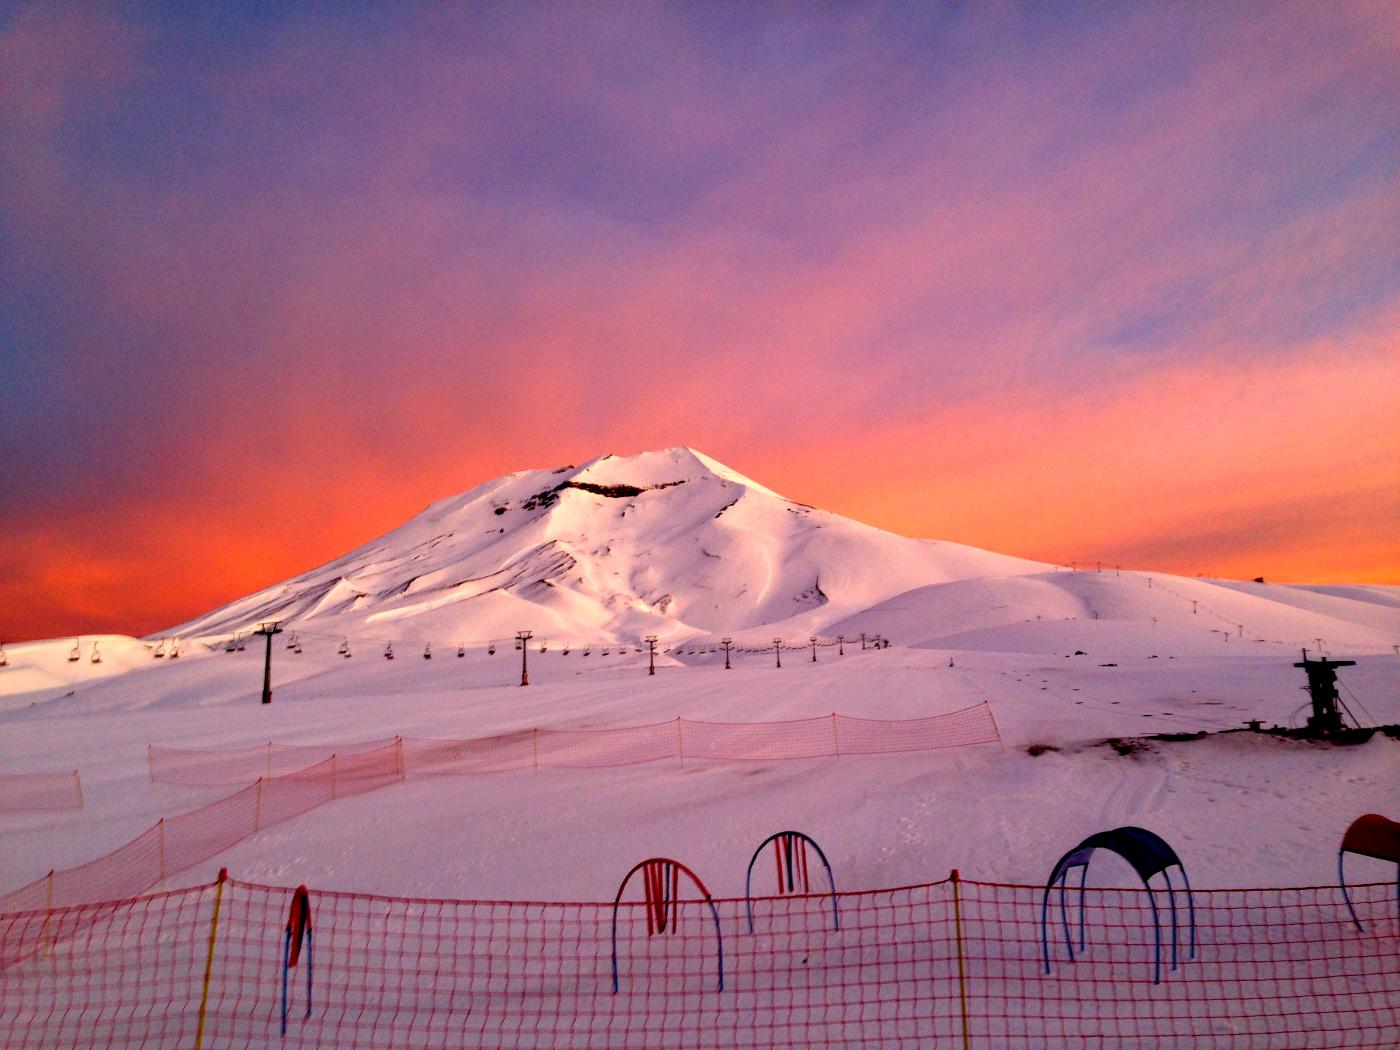 How I Became a Ski Instructor in Chile